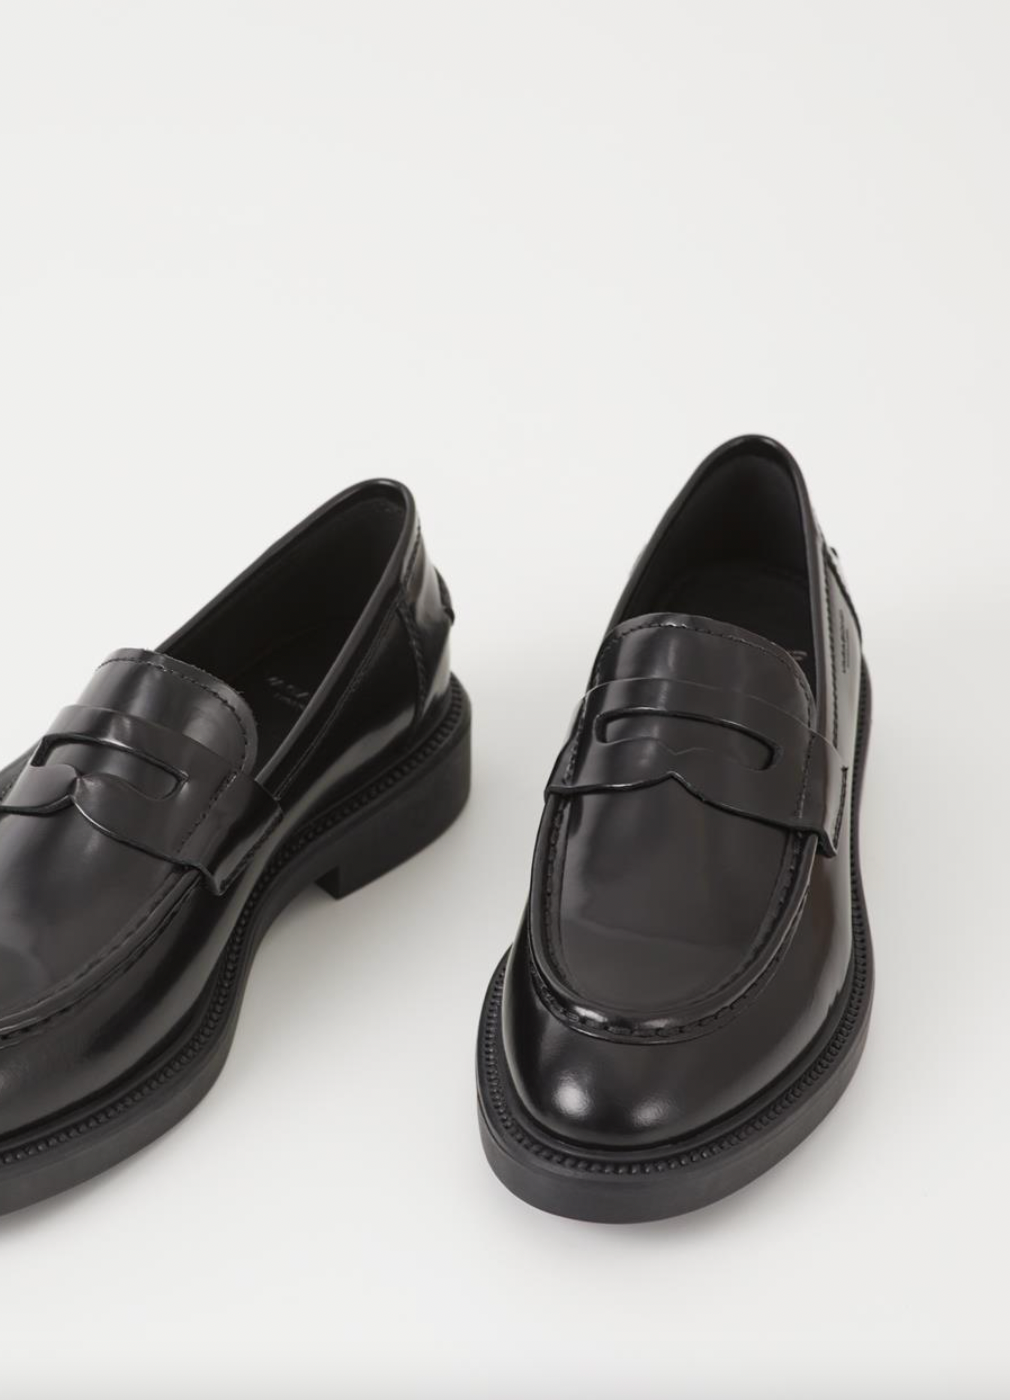 Product Image for Alex W Loafer, Black